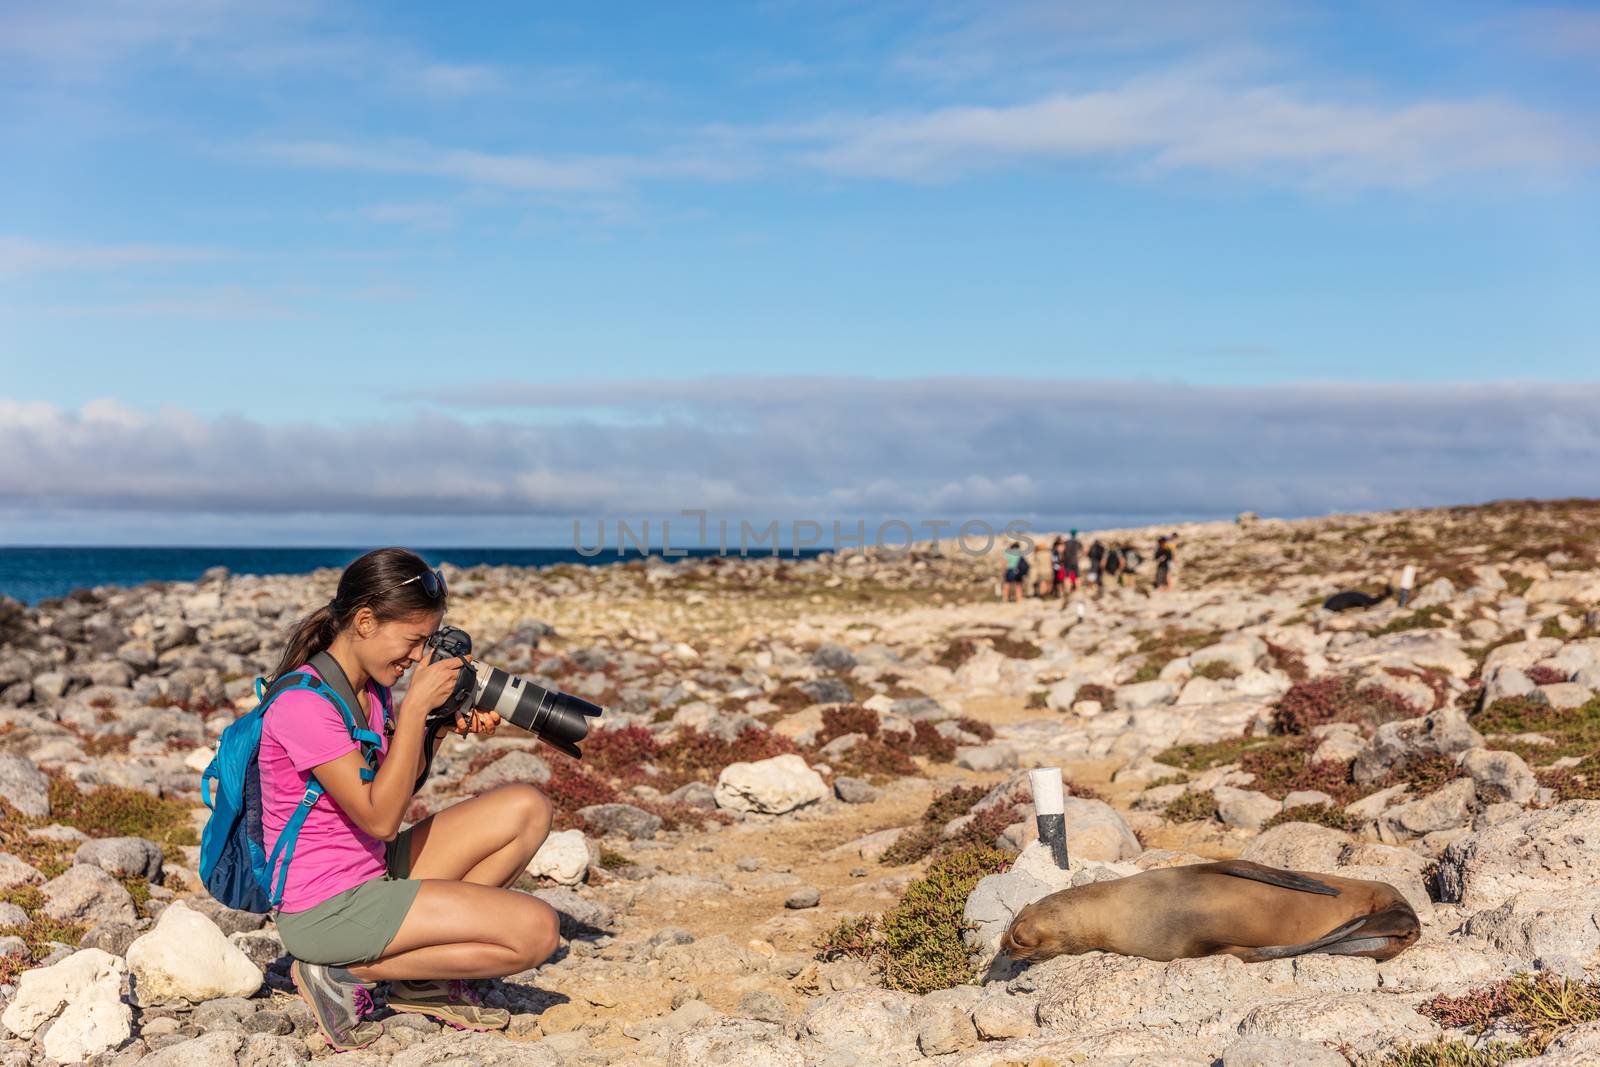 Galapagos tourist taking pictures of Sea Lion on North Seymour by Maridav